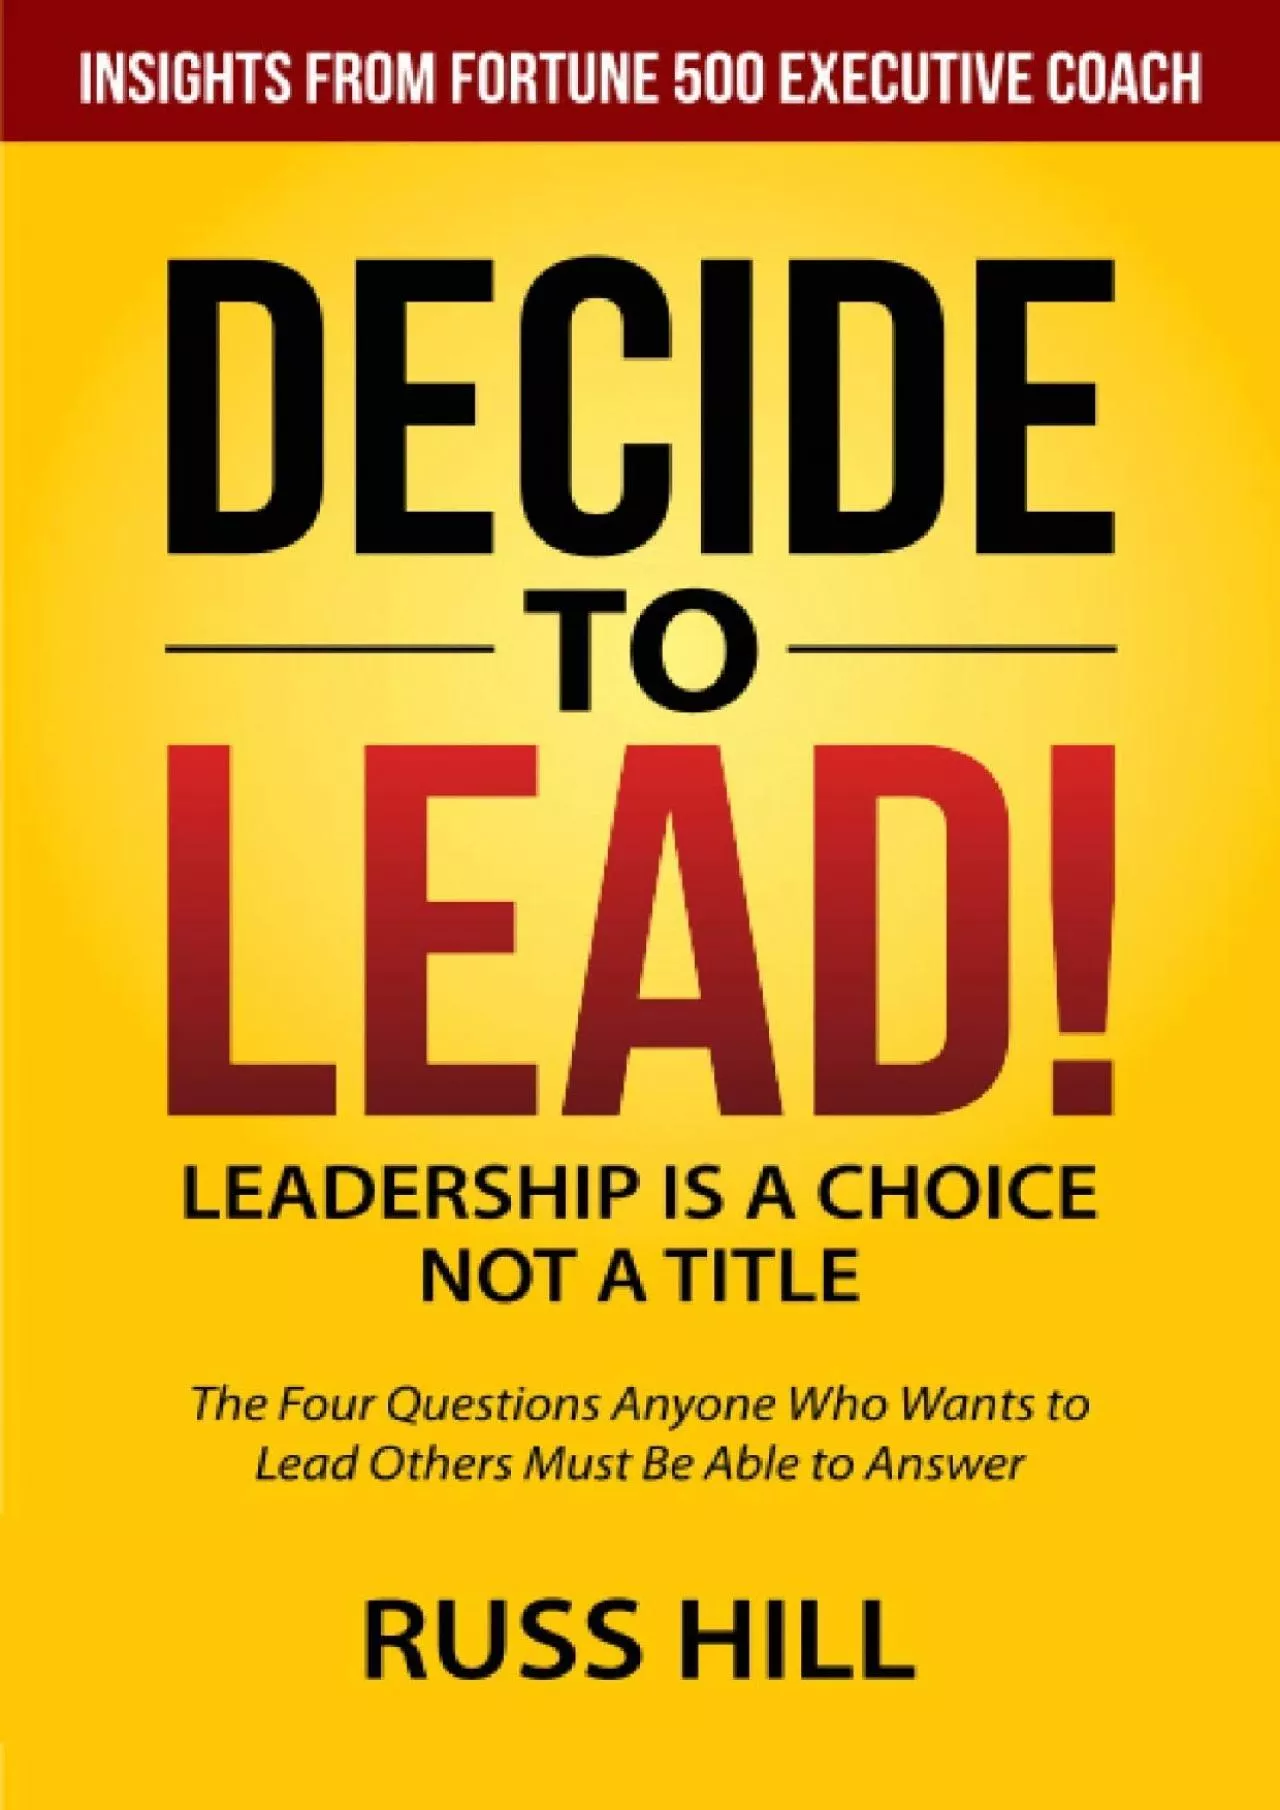 (BOOK)-Decide to Lead: The Four Questions Anyone Who Wants to Lead Others Must Be Able